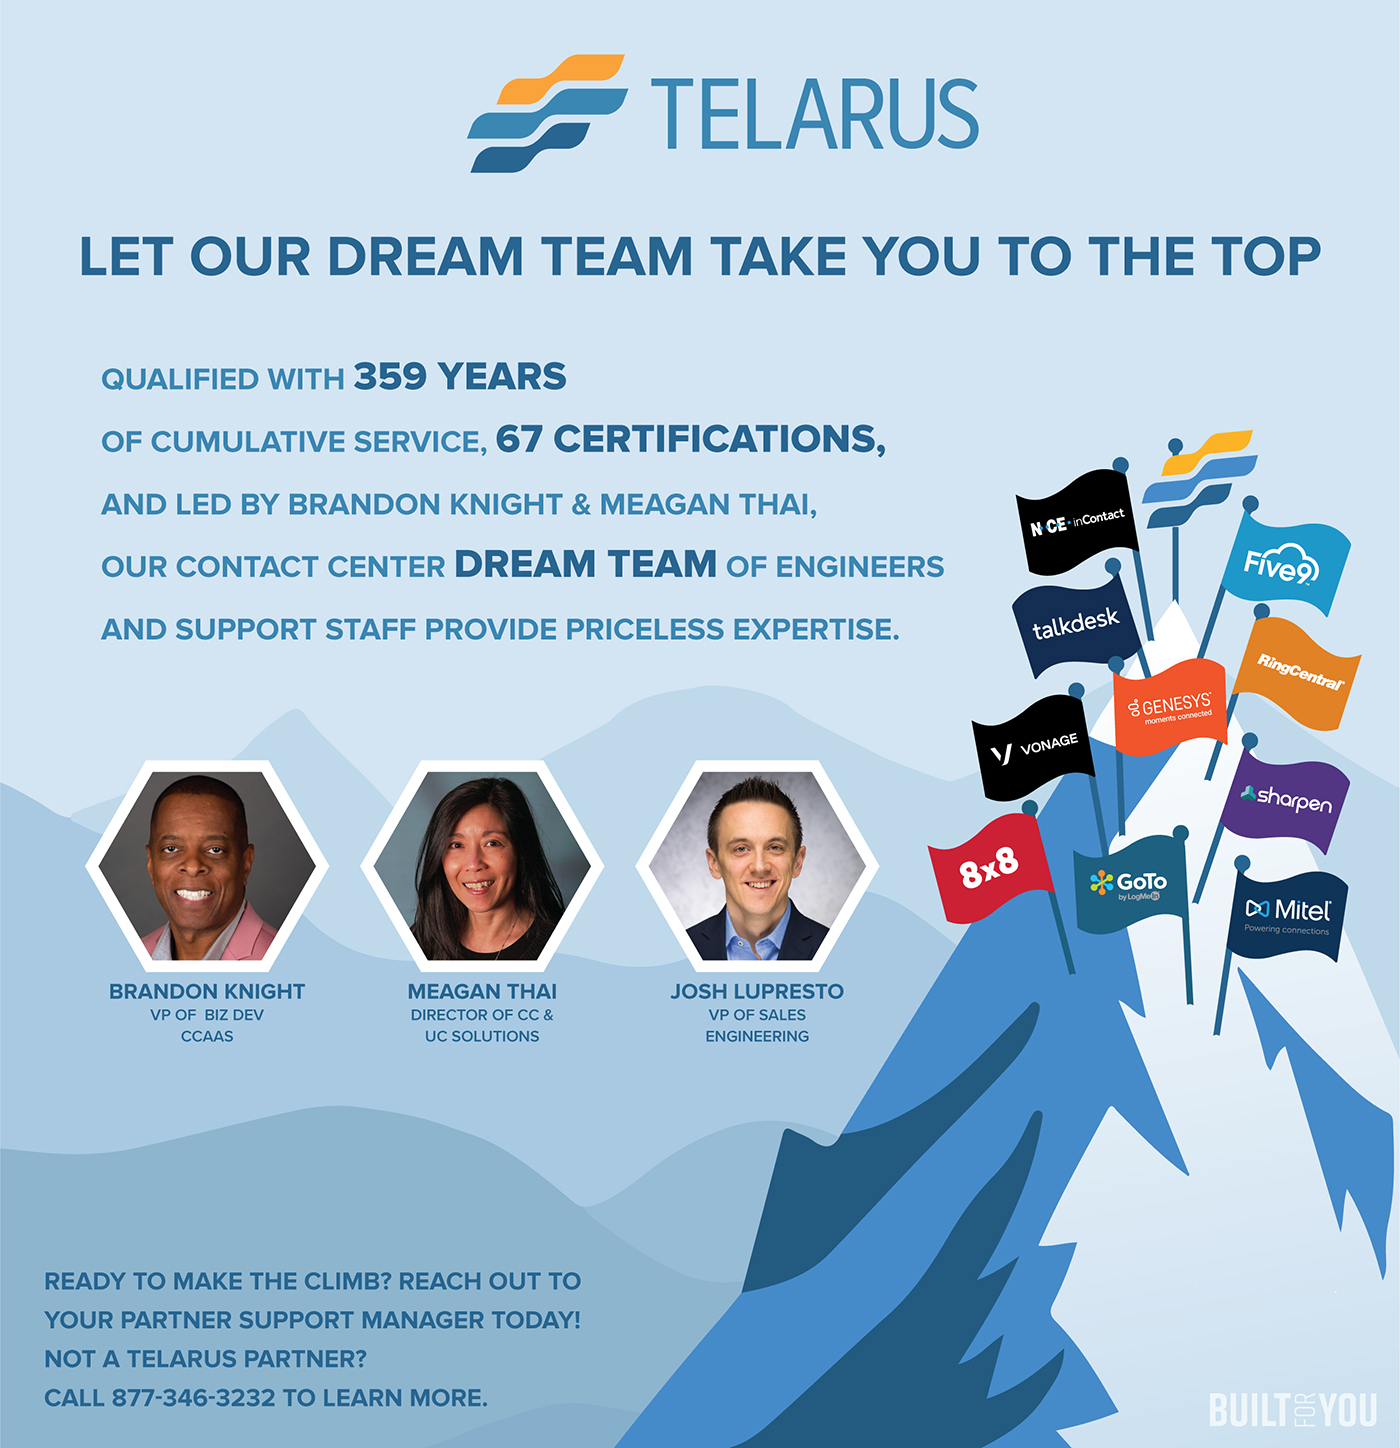 Let the Telarus Dream Team Take You to the Top